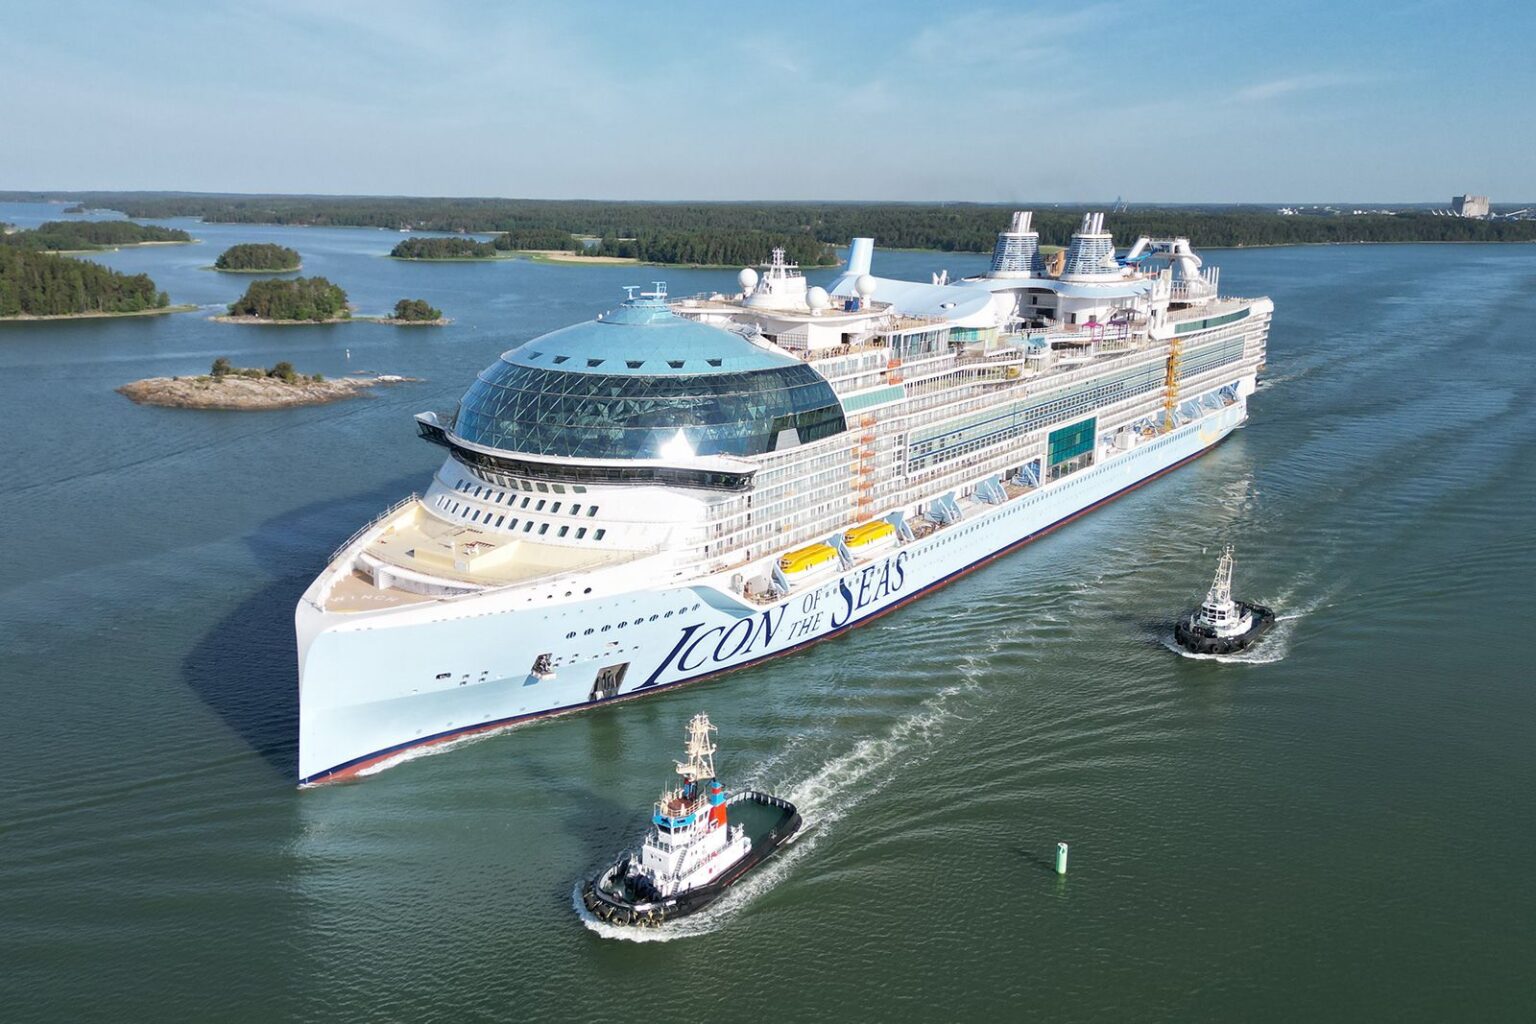 The biggest cruise ship in the world 'Icon of the Seas' starting its